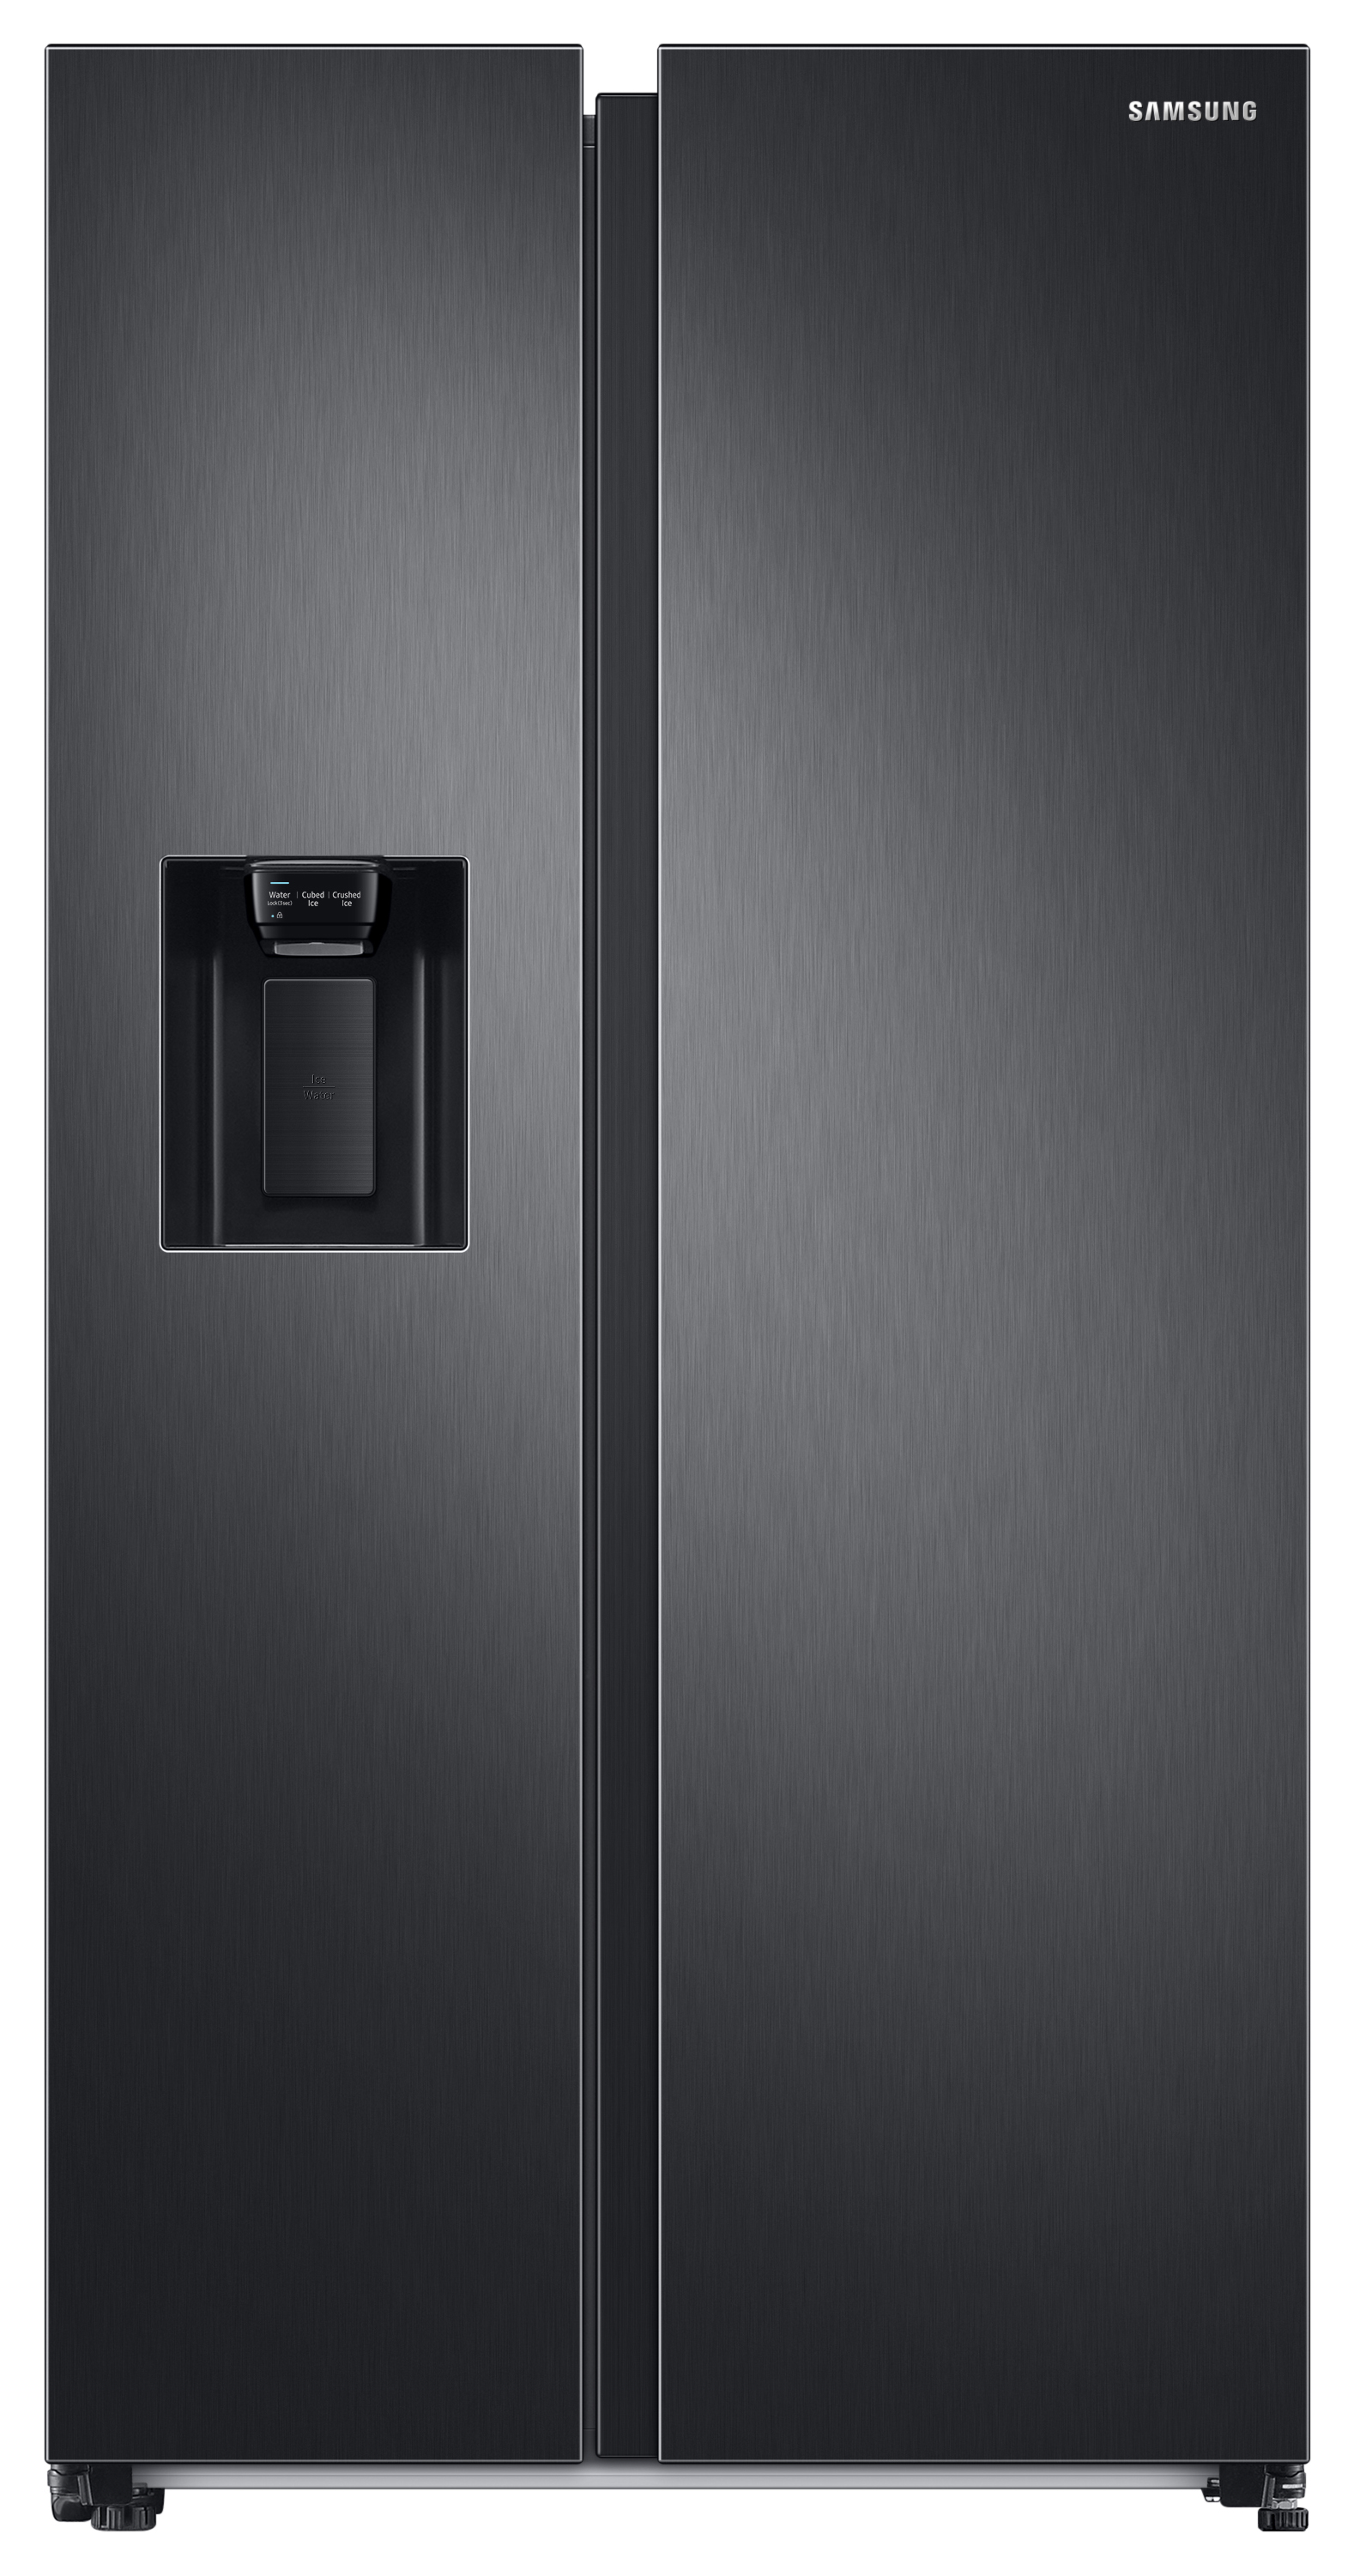 Image of Samsung RS68A884CB1/EU Water & Ice Dispenser C-Rated American Fridge Freezer - Black Stainless Steel